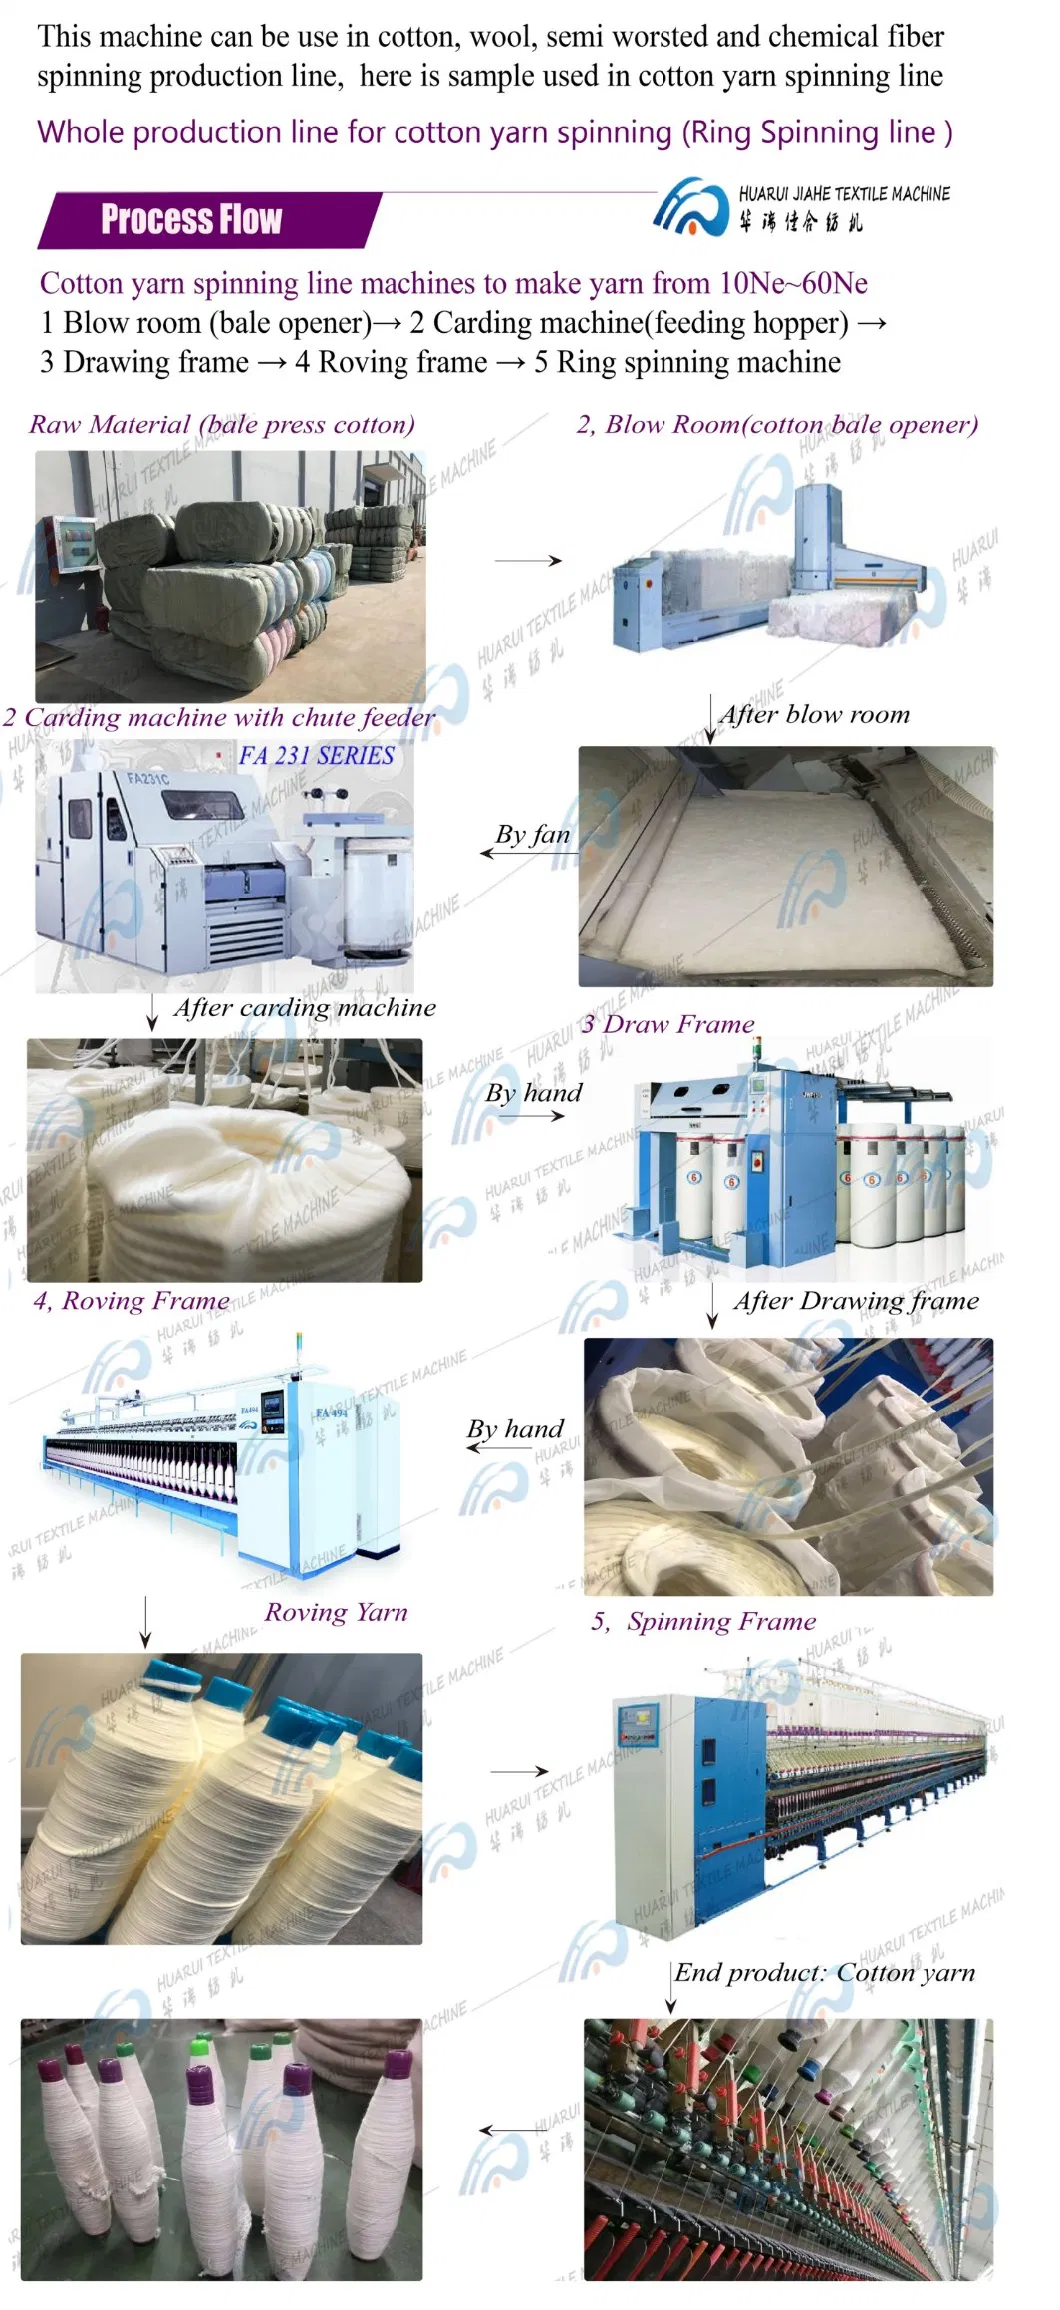 Layer-Continuous Drying. Industrial Belt Continuous Dryer Machine for Loose Fiber and Hank Yarn